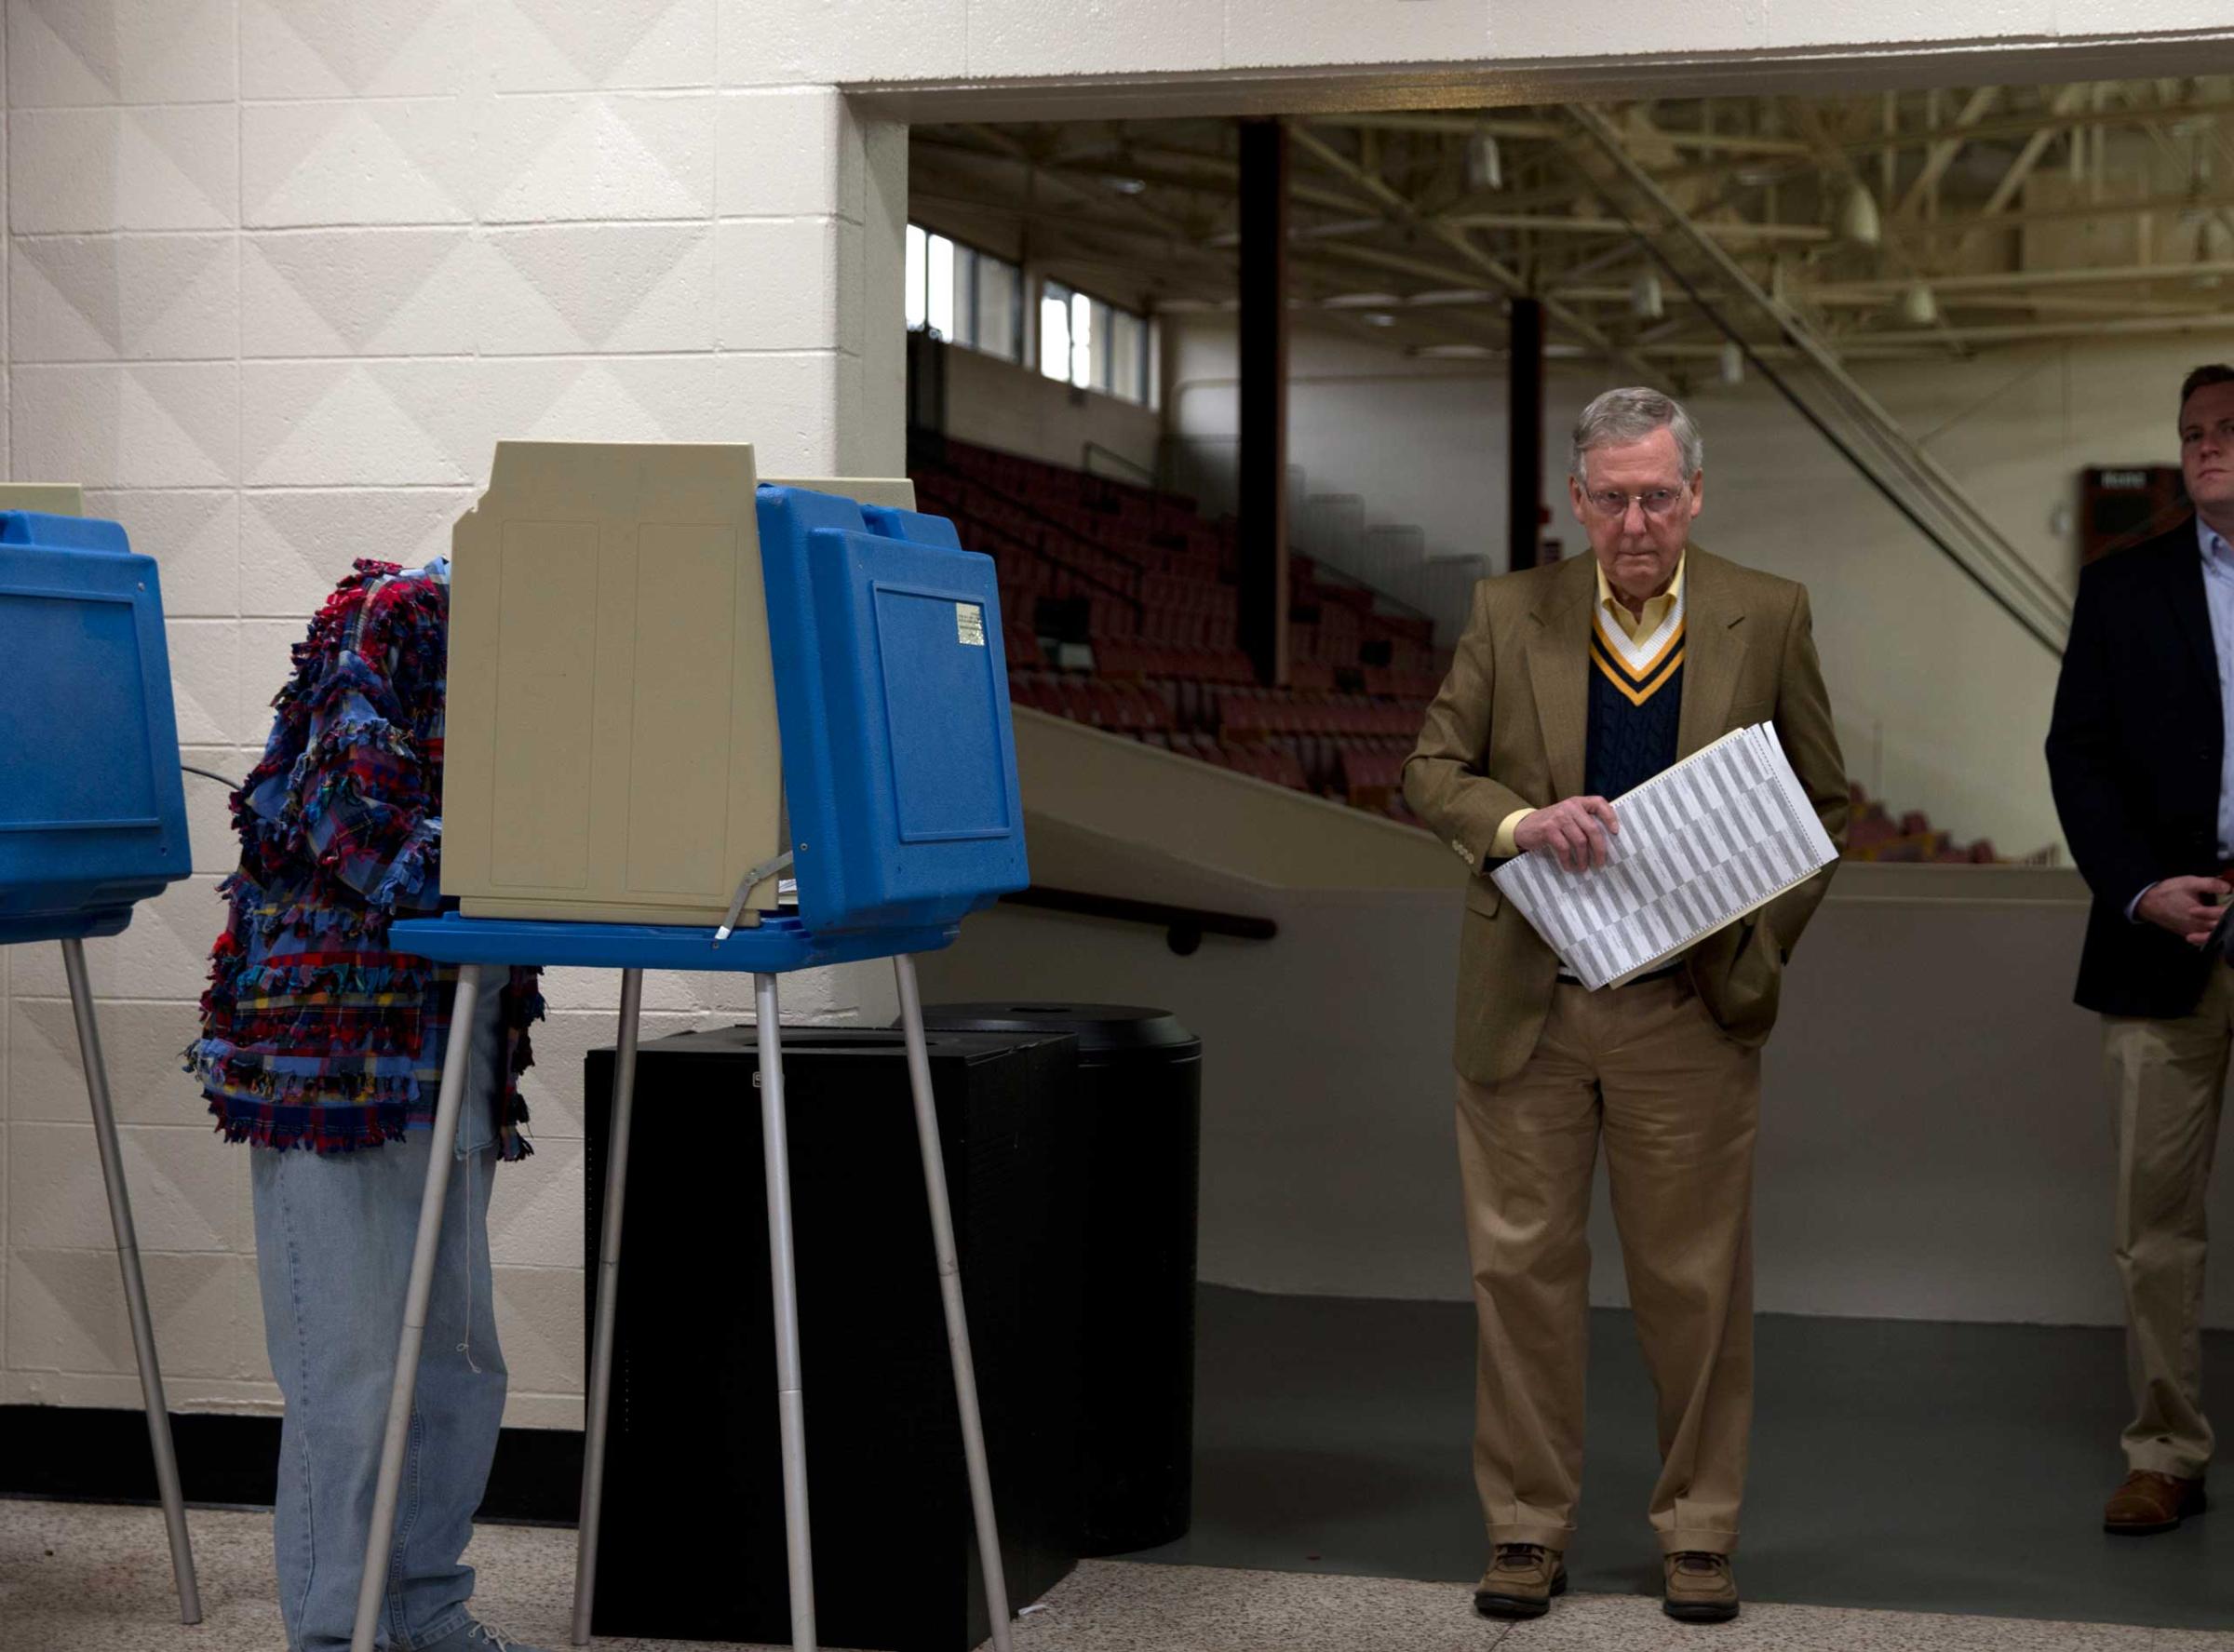 Mitch McConnell, the senior Senator from Kentucky, votes in the midterm election at Bellarmine University Knights Hall Hallway in Louisville, Ky. on Nov. 4, 2014.